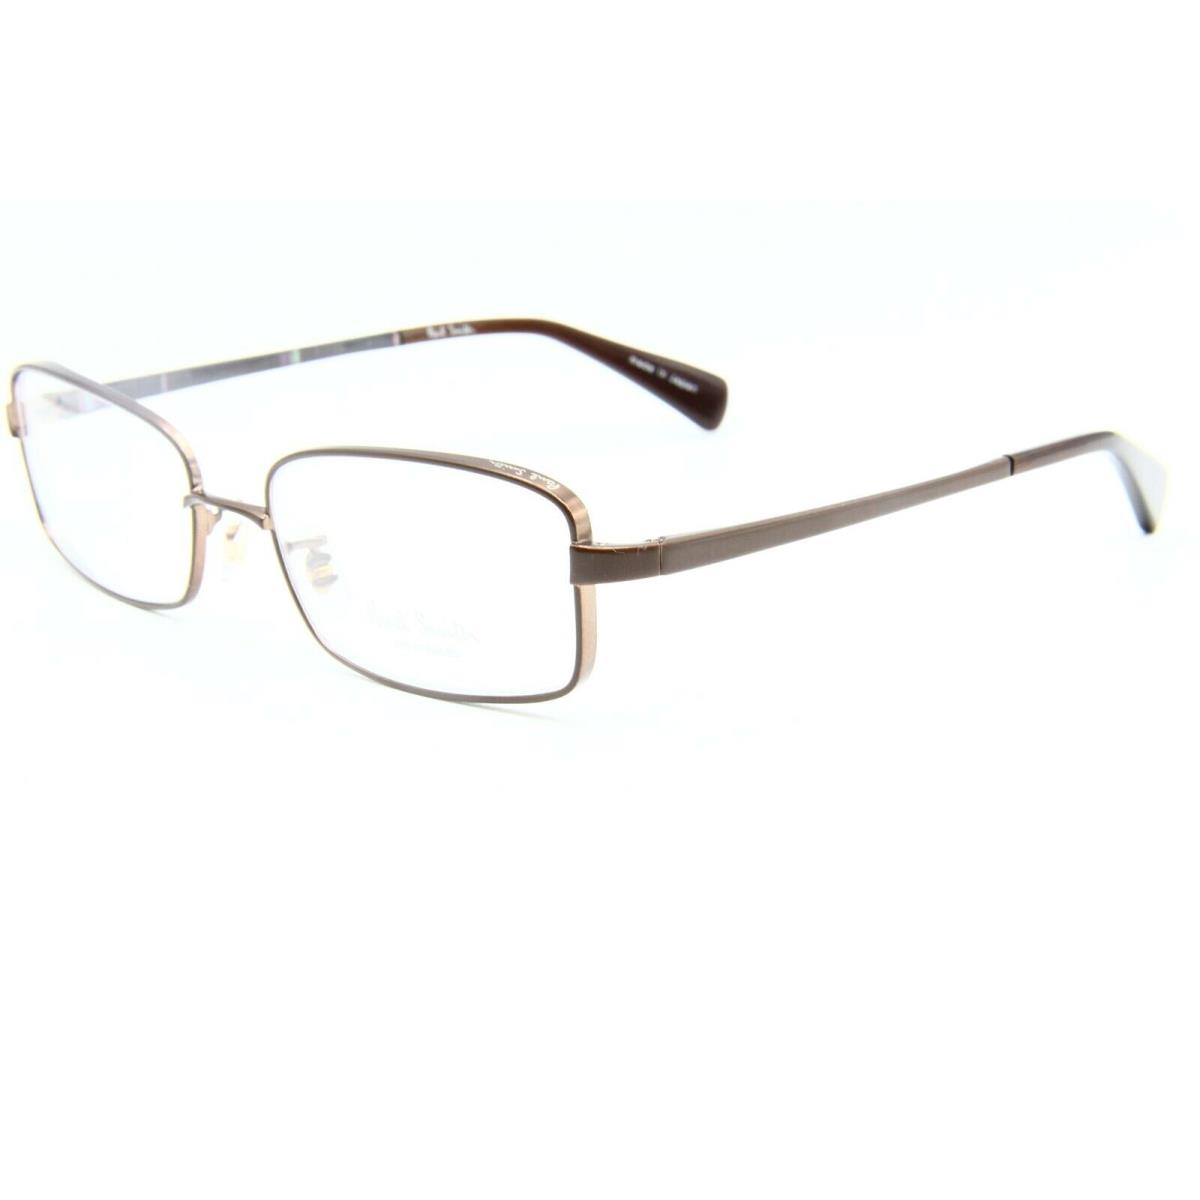 Paul Smith PS-1018 W Brown Eyeglasses Frame RX 54-18